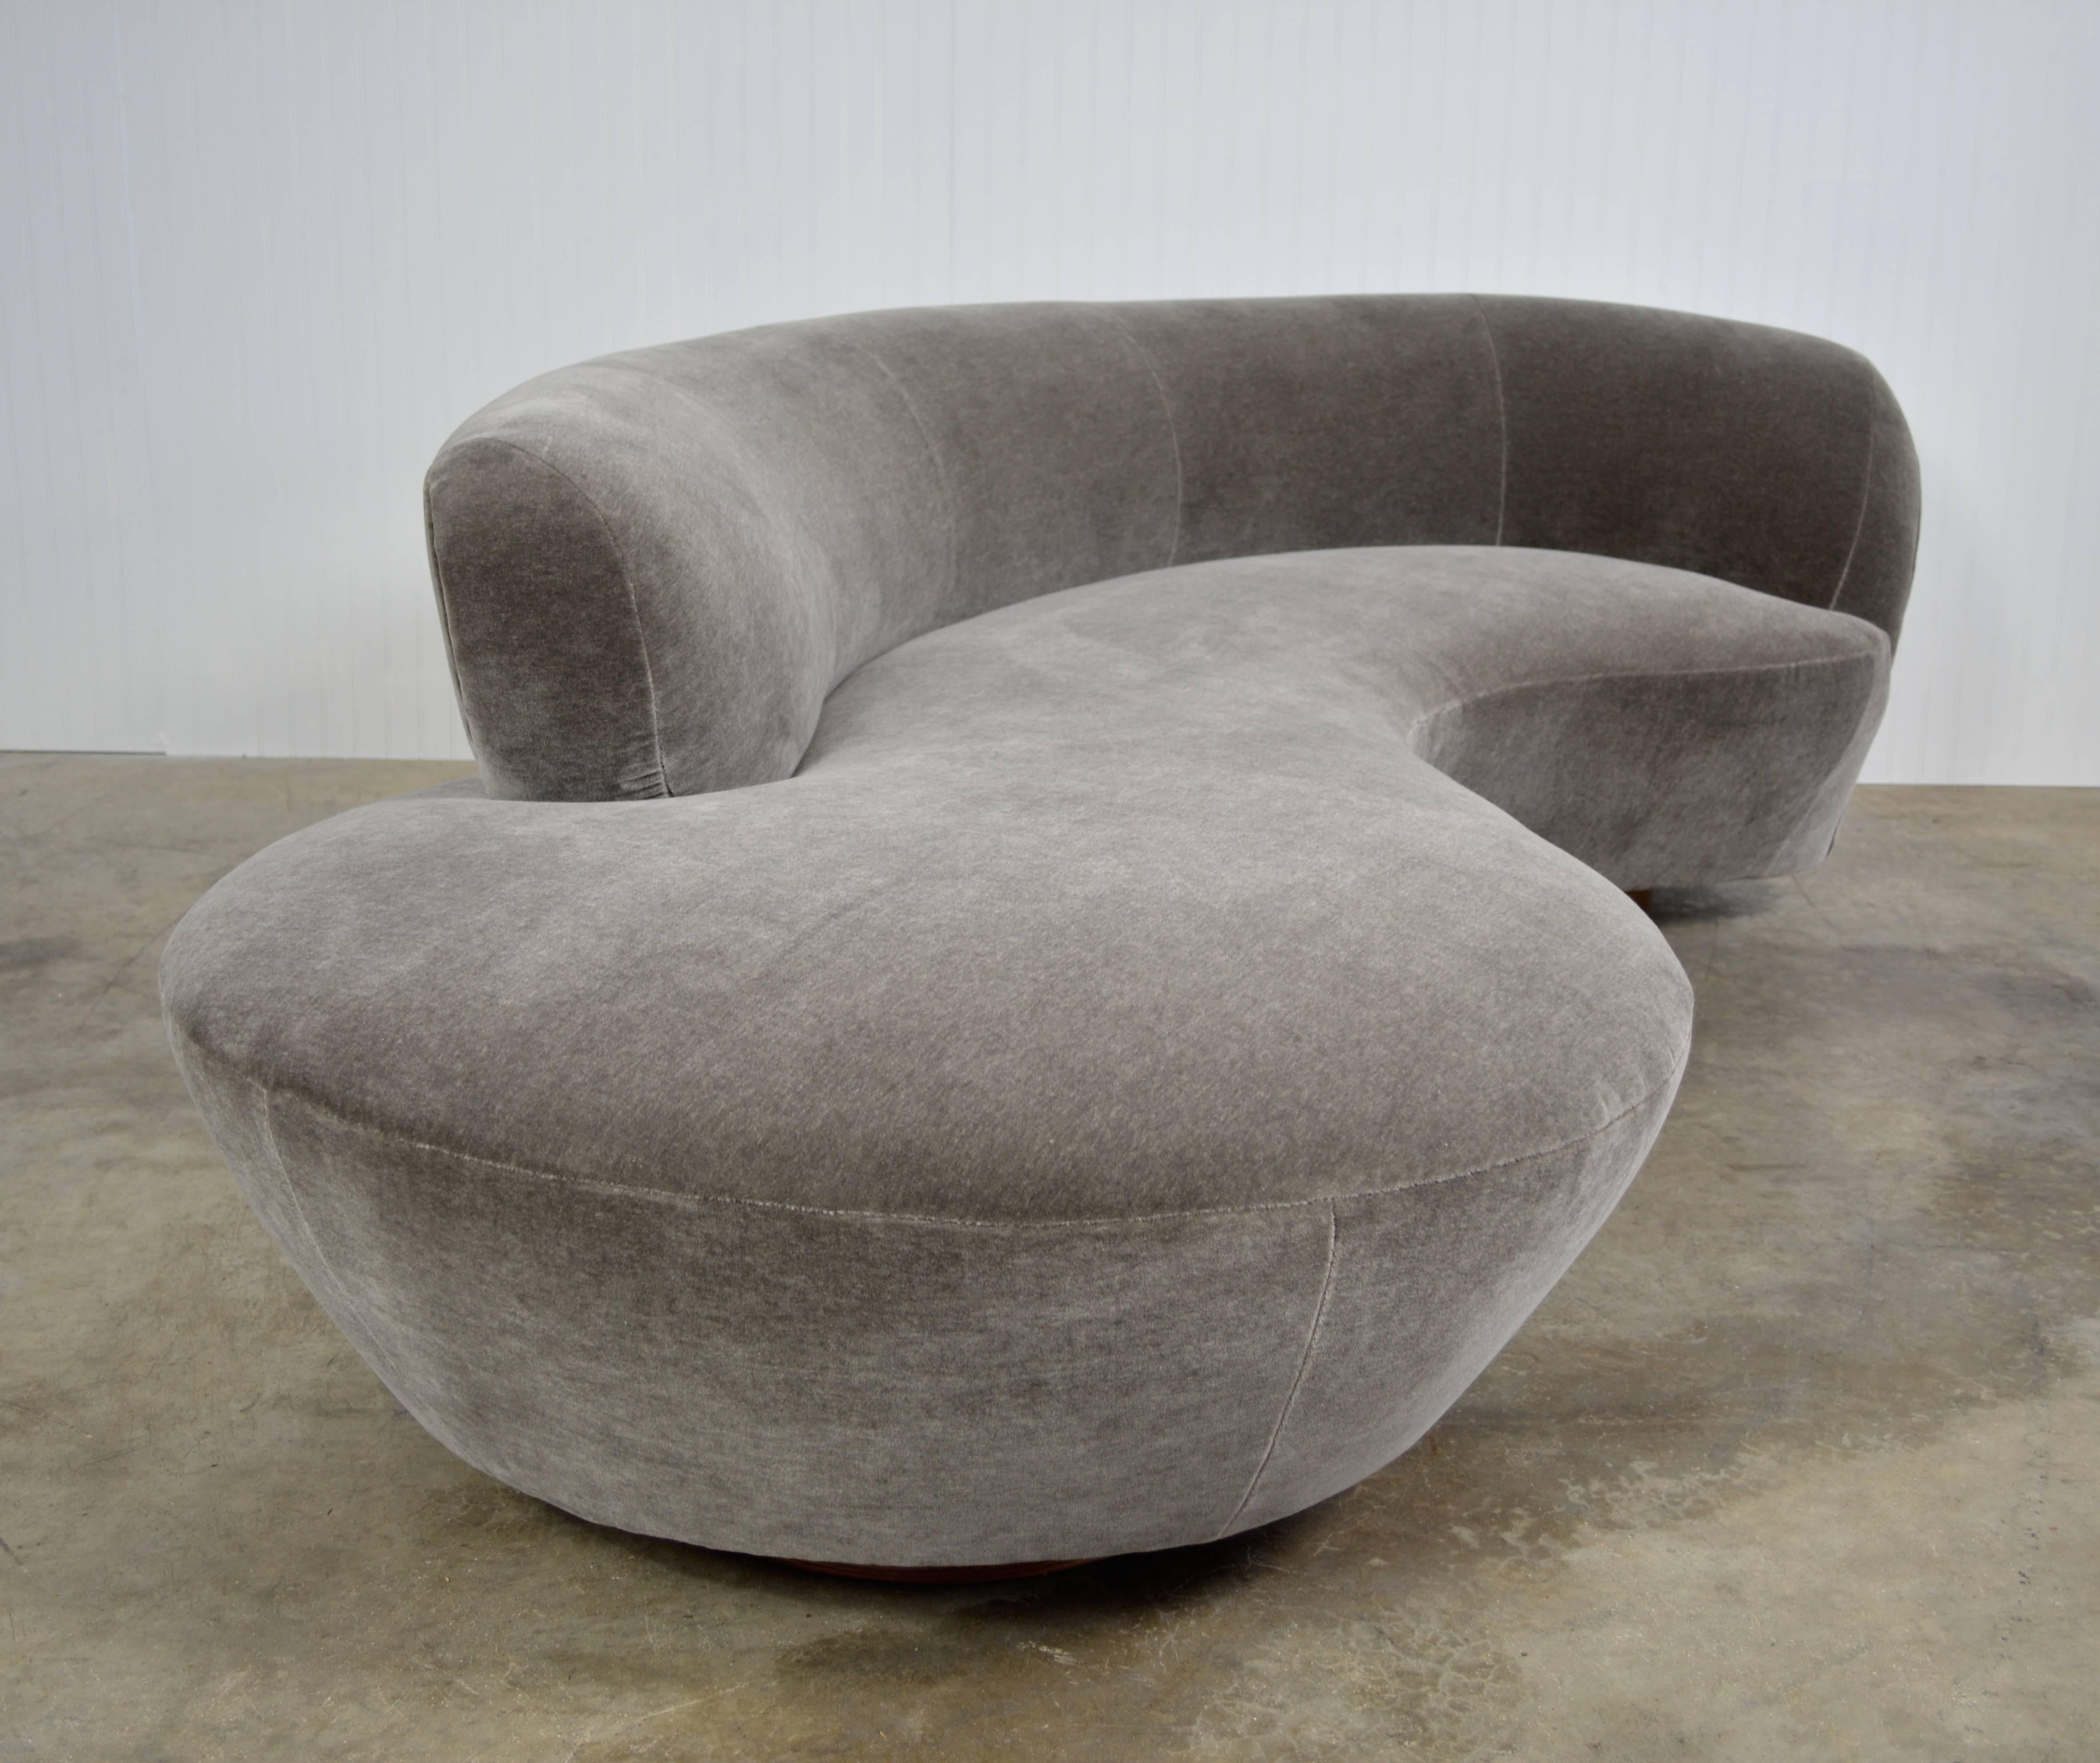 Vladimir Kagan sofa designed for Directional. Newly recovered in grey mohair over walnut bases. Lucite support place and Directional label present.